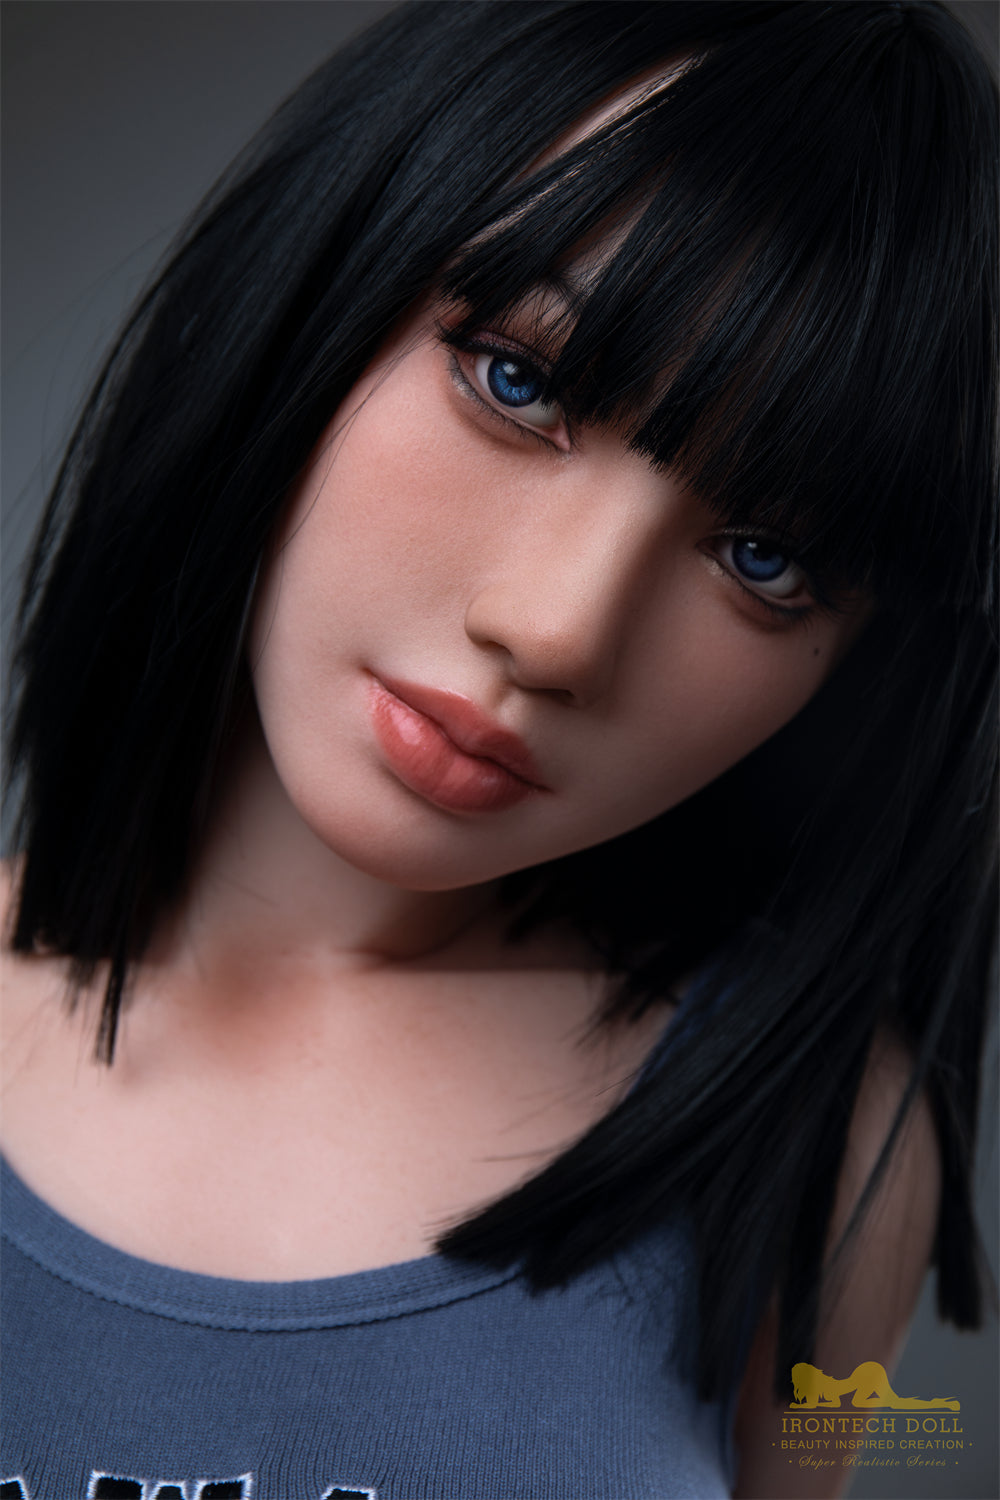 Irontech Doll 153 cm Silicone - Rita | Buy Sex Dolls at DOLLS ACTUALLY